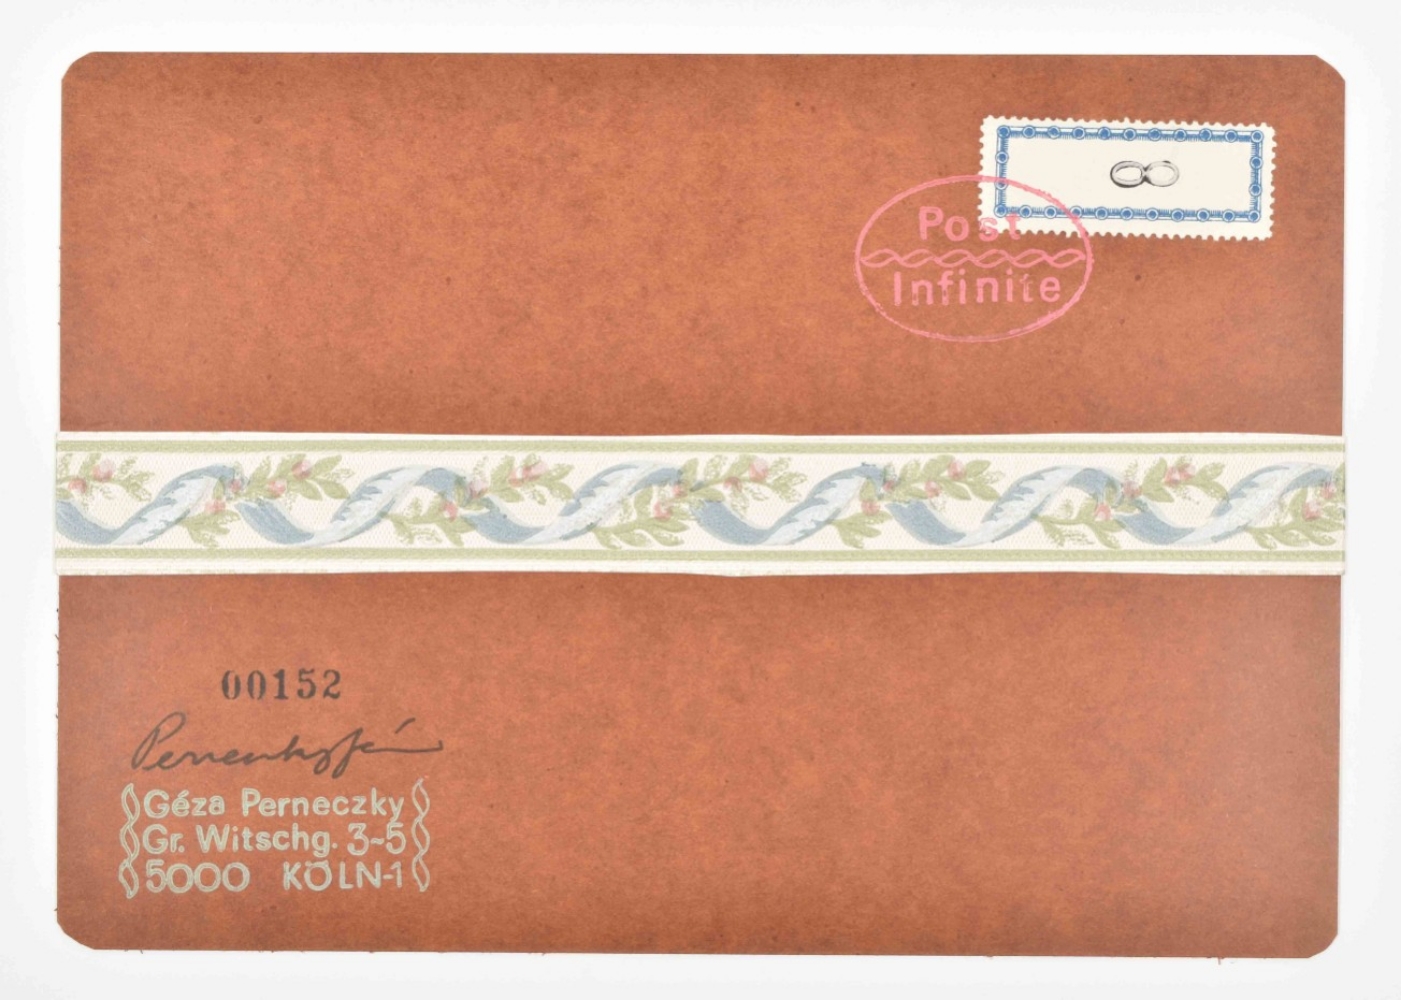 Geza Perneczky, Post Infinite and International Stamps No.1 and No.2 - Image 6 of 10